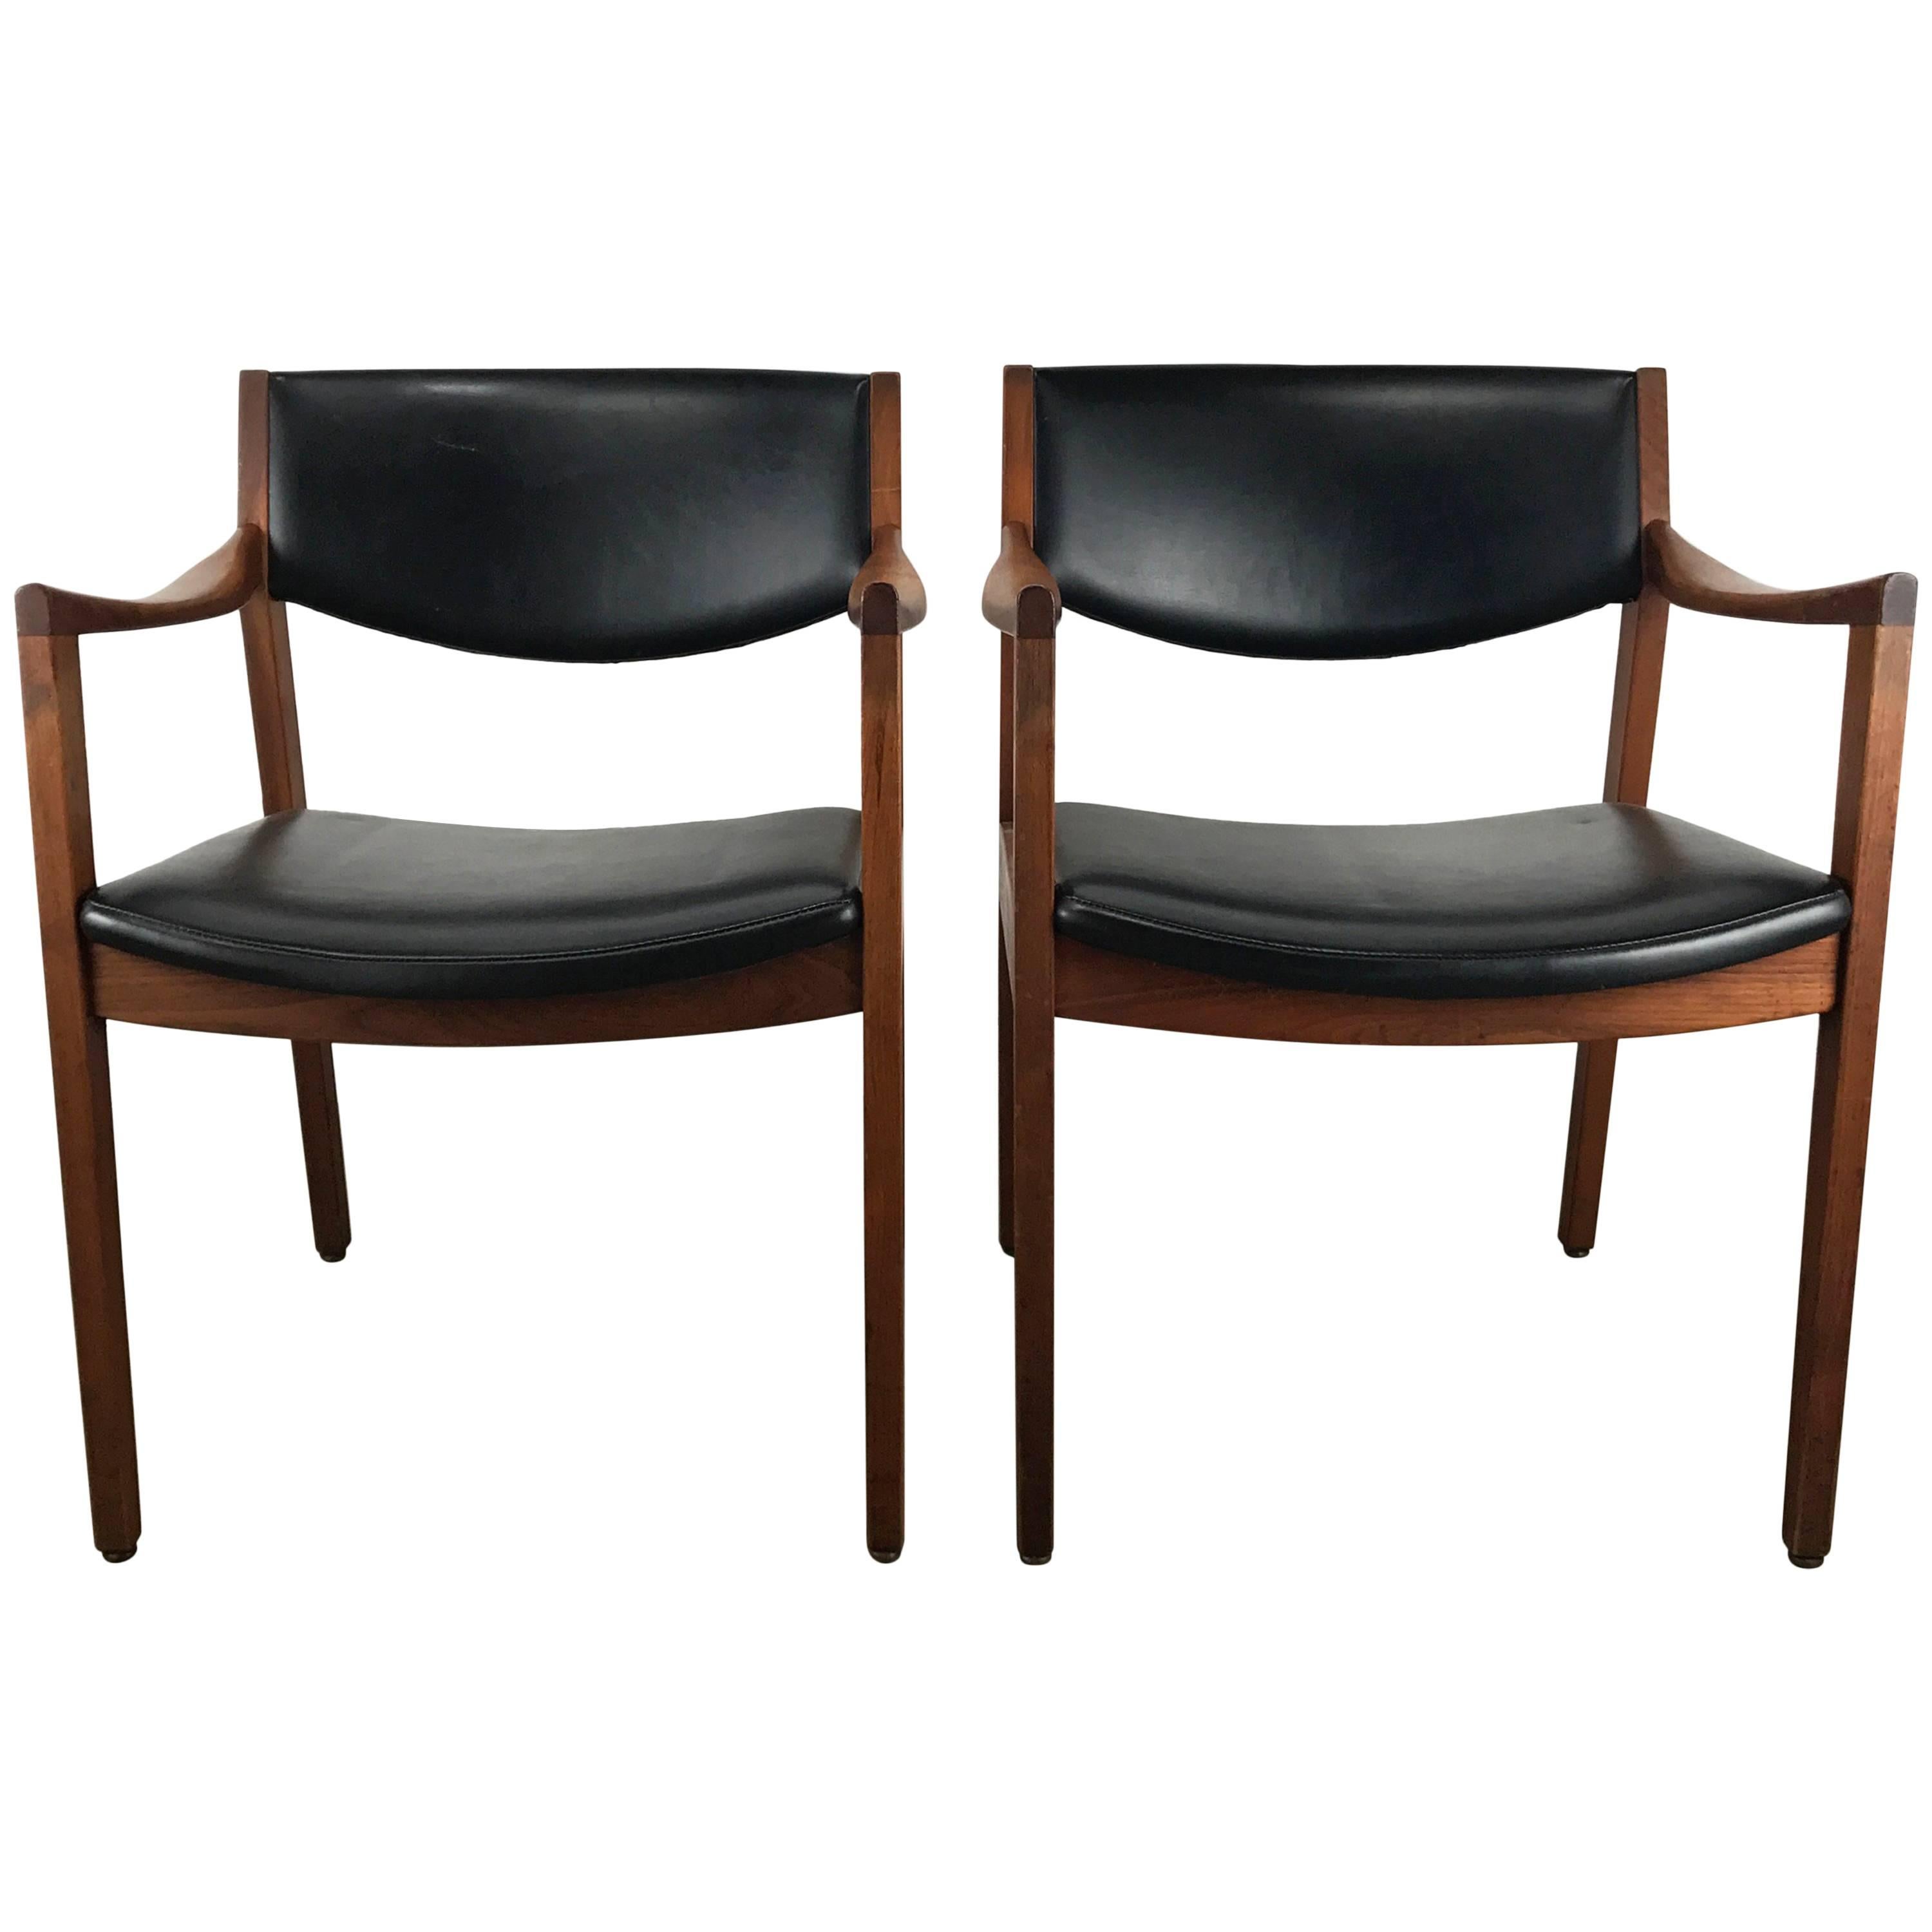 Stunning Pair of Modernist Oiled Walnut and Black Armchairs by Gunlocke